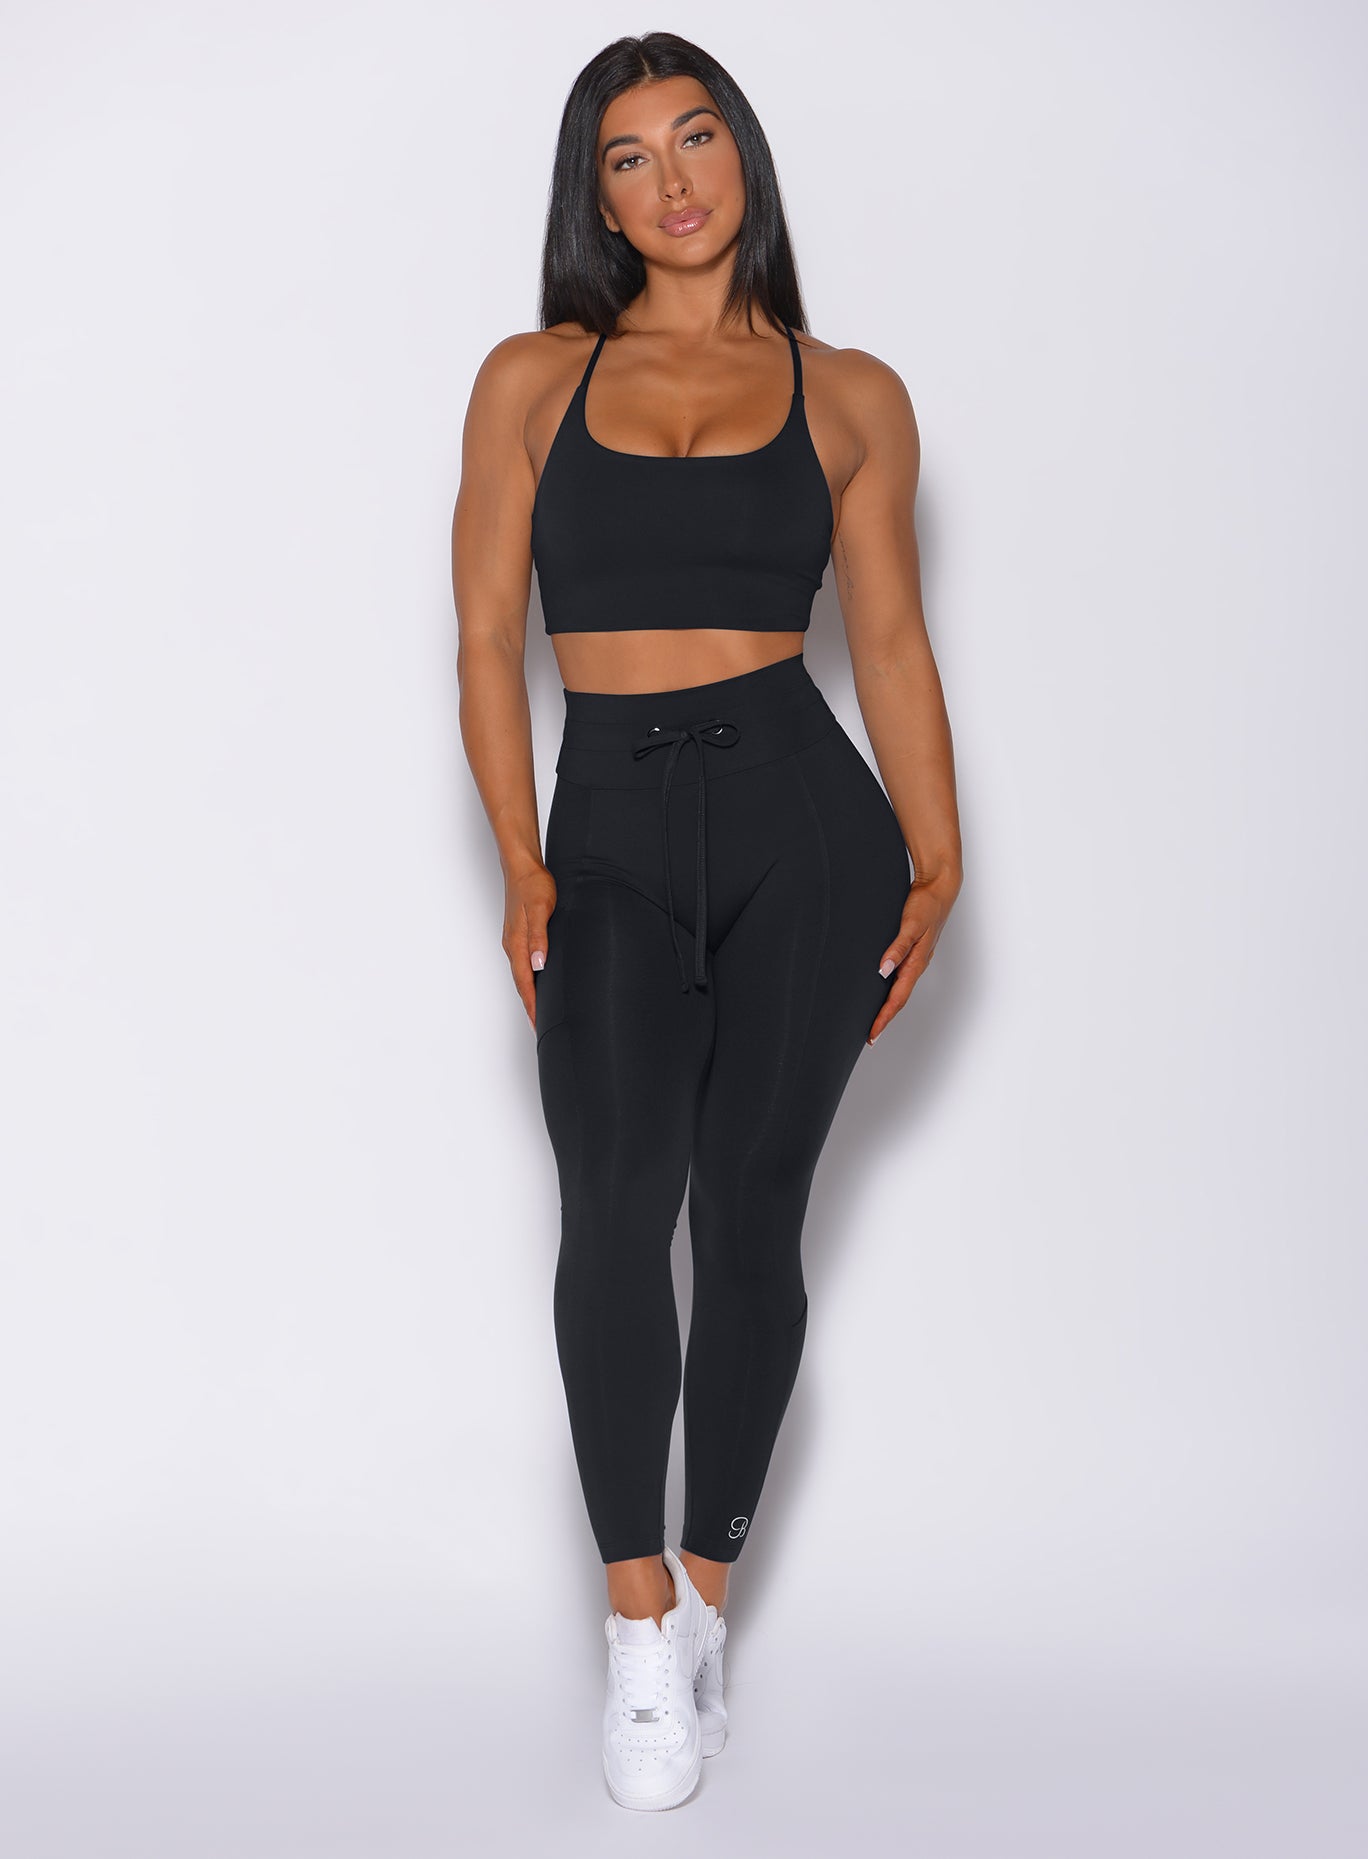 Model facing forward wearing our black empower leggings and a black bra 